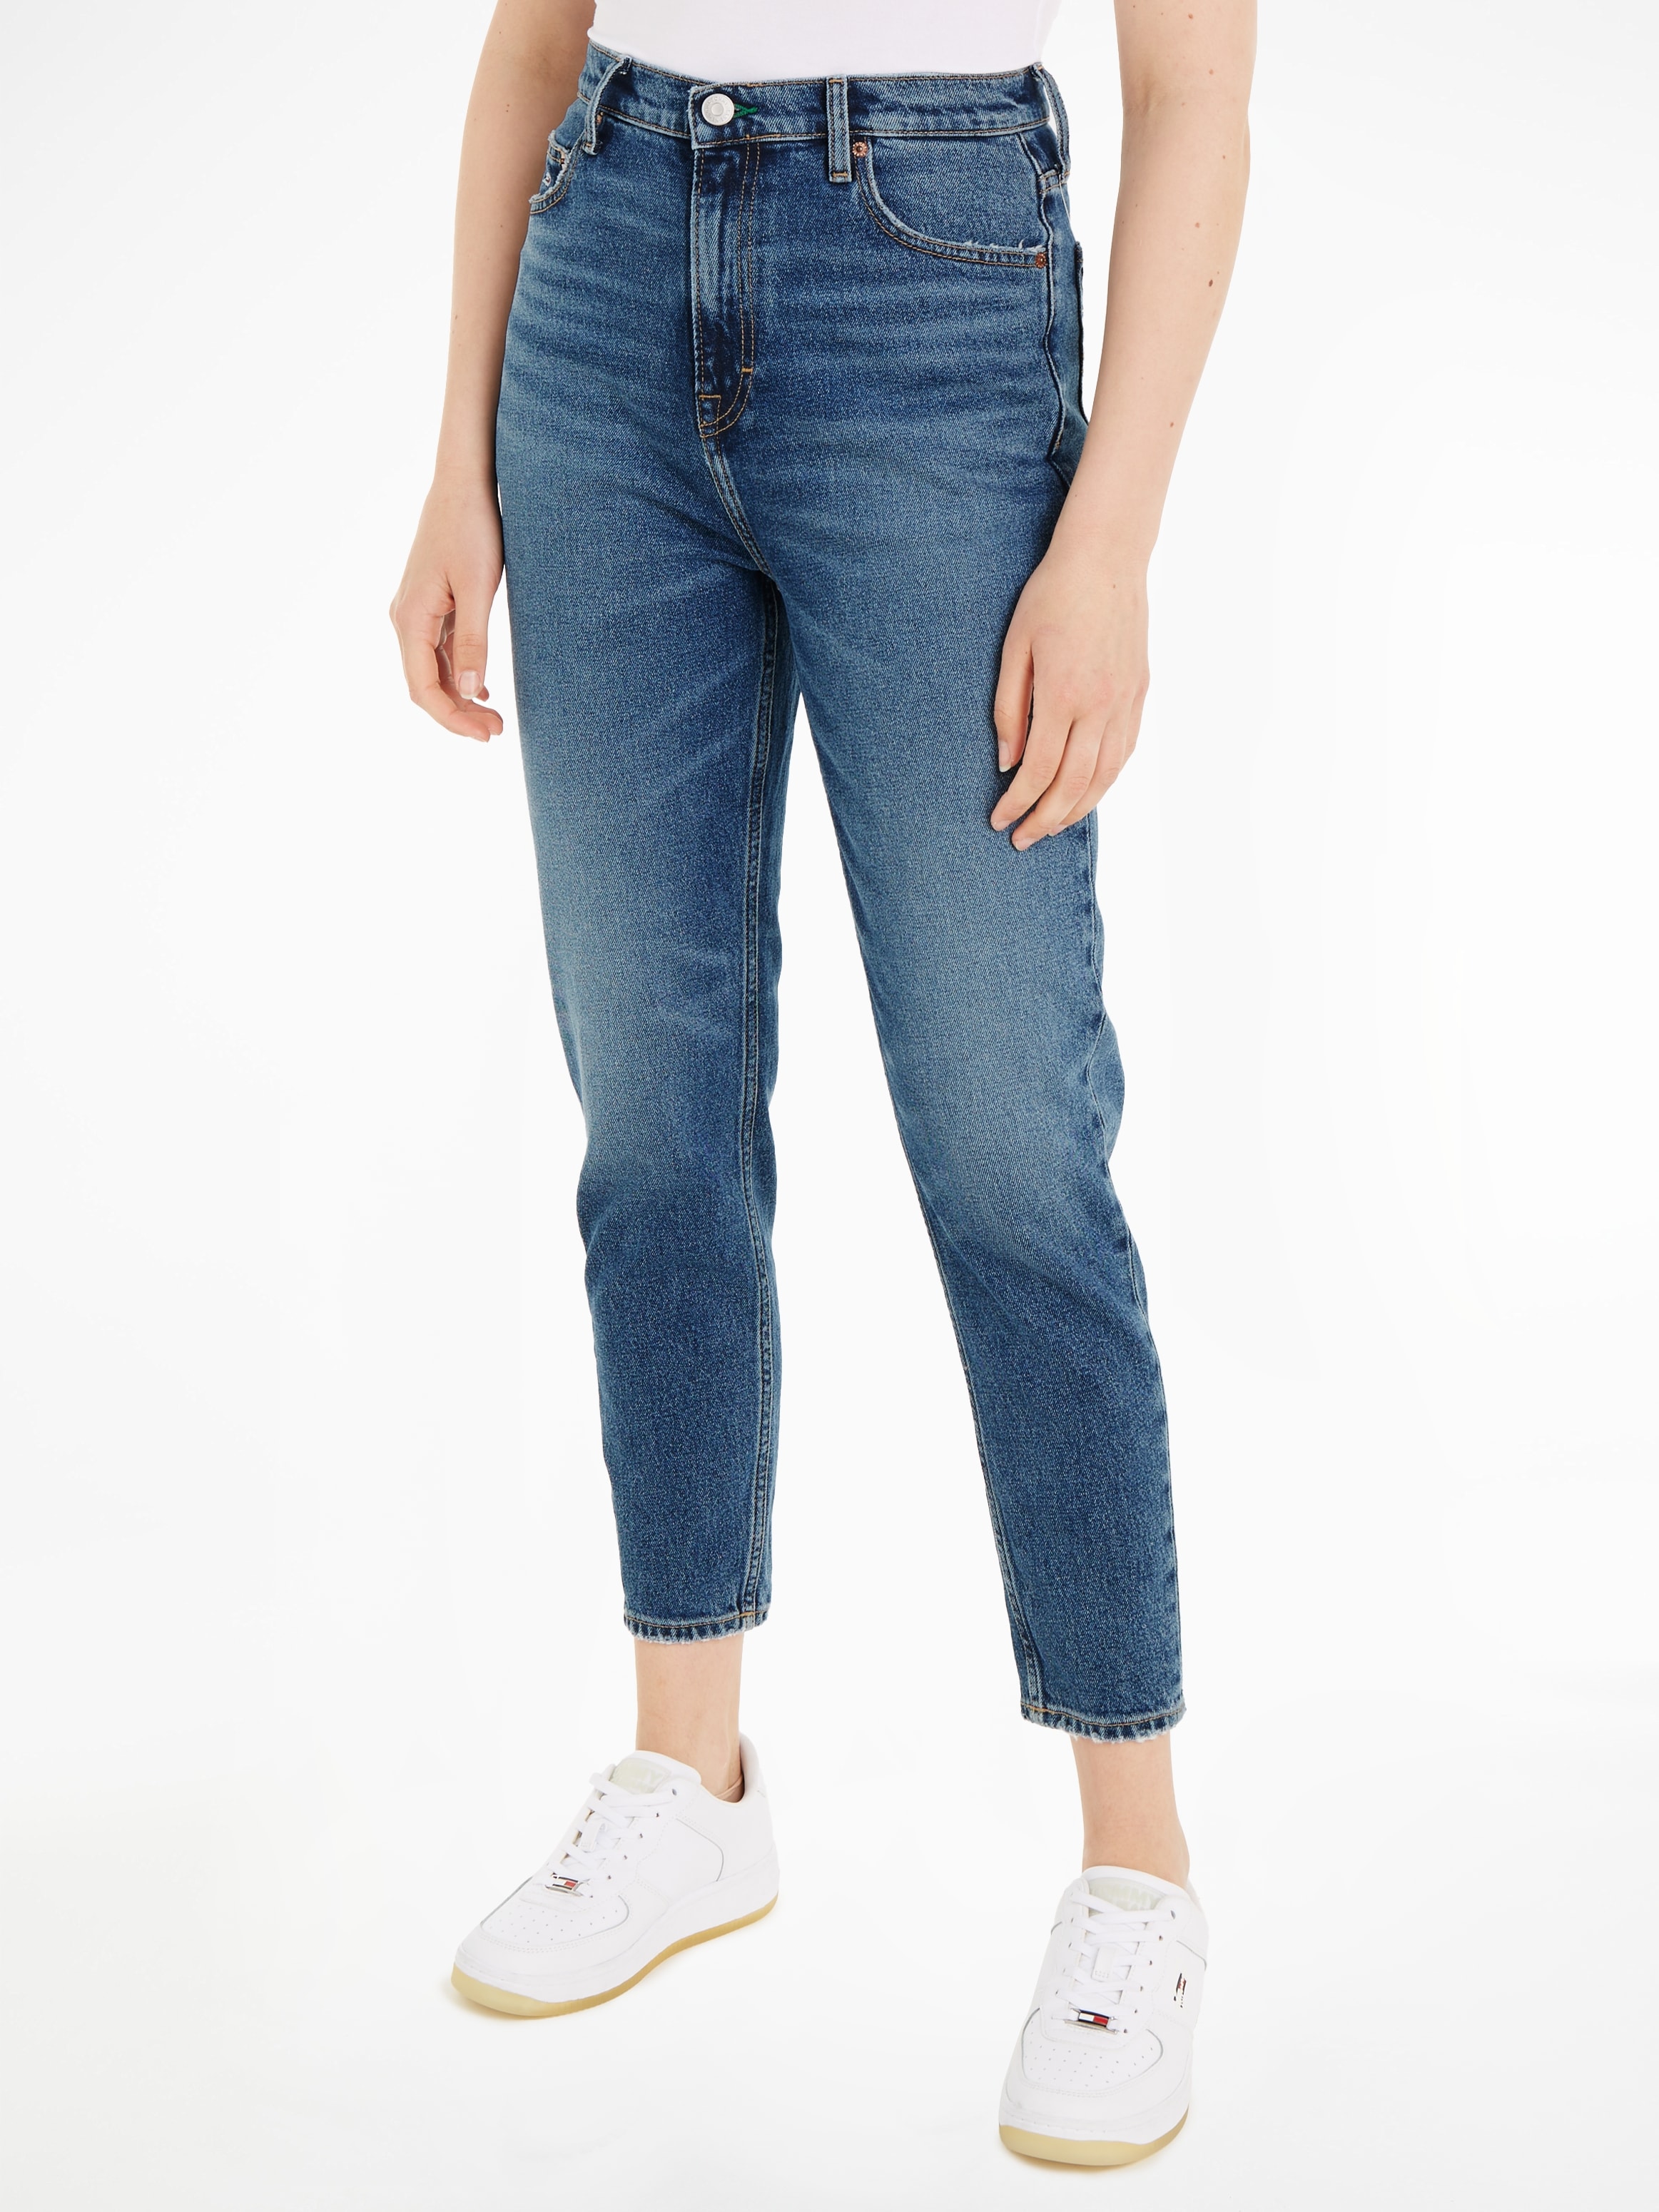 & mit »MOM Jeans Tommy ♕ bei Flag Jeans UH SLIM Mom-Jeans CG4215«, Logo-Badge Tommy